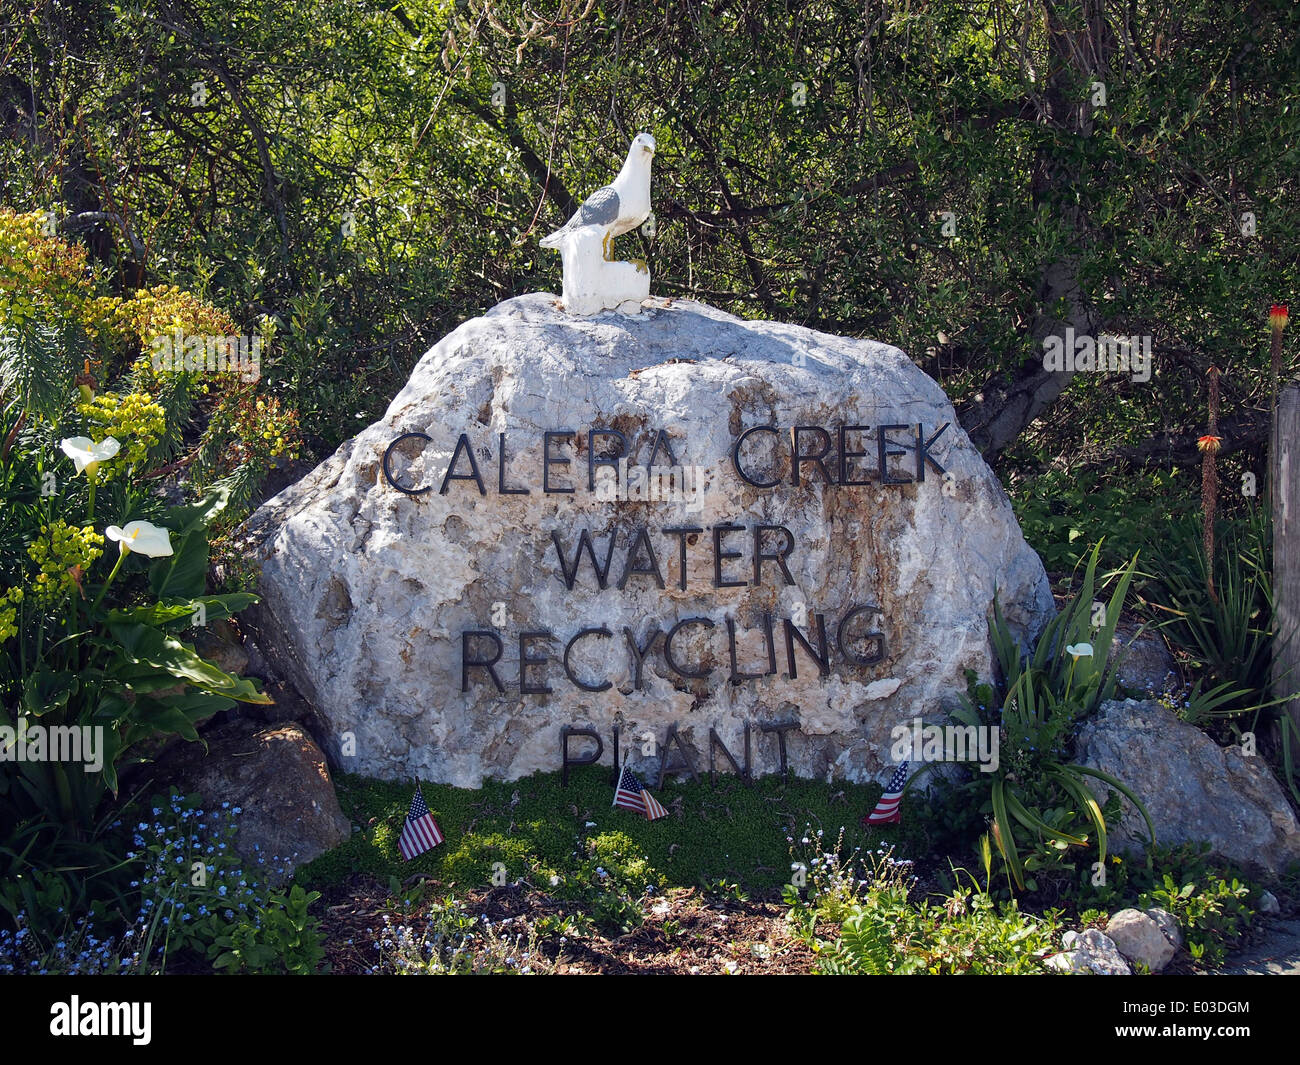 Calera Creek Water Recycling Plant entrance sign Pacifica California Stock Photo